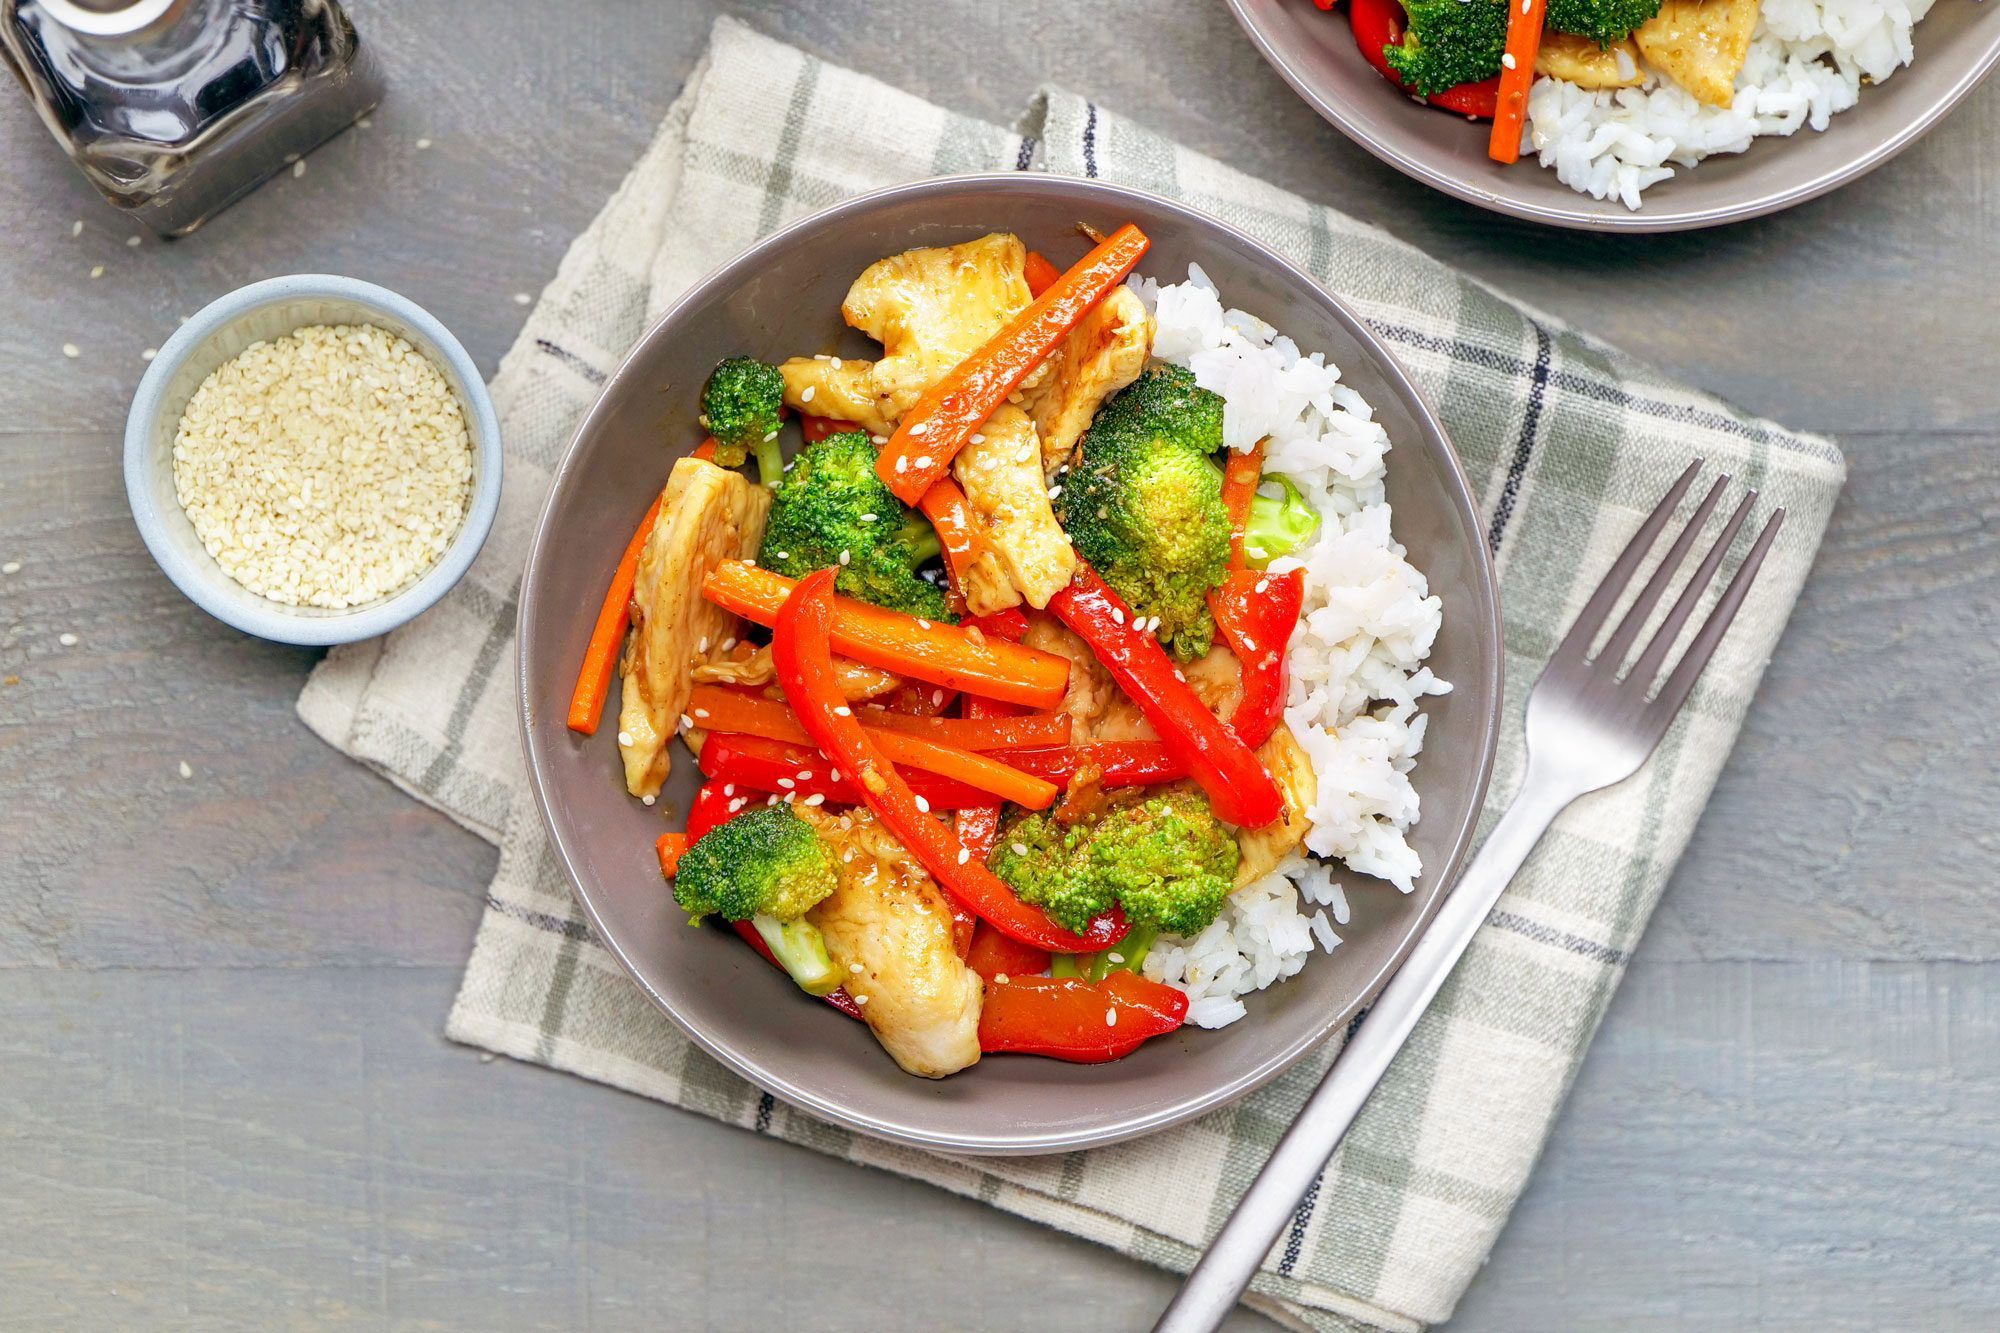 How to Make a Simple Chicken Stir-Fry